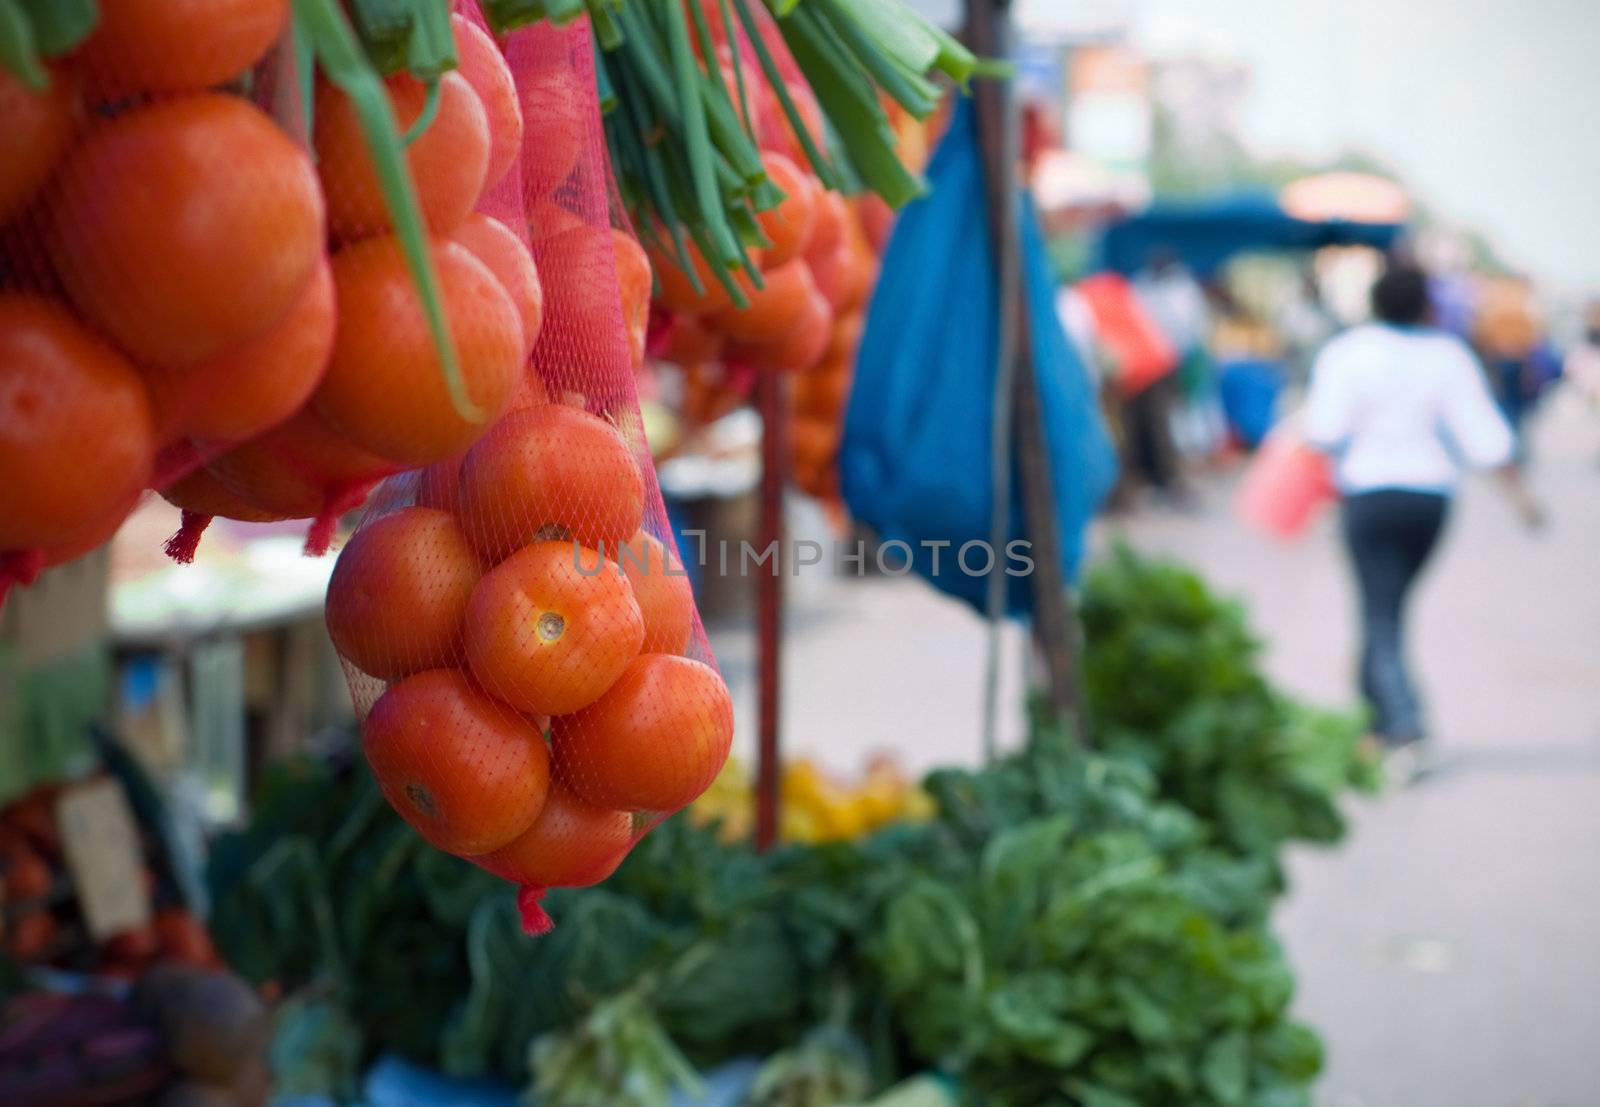 Alexandra, Johannesburg African market scene with shack and tomatos - shallow depth of field with focus on front tomatos